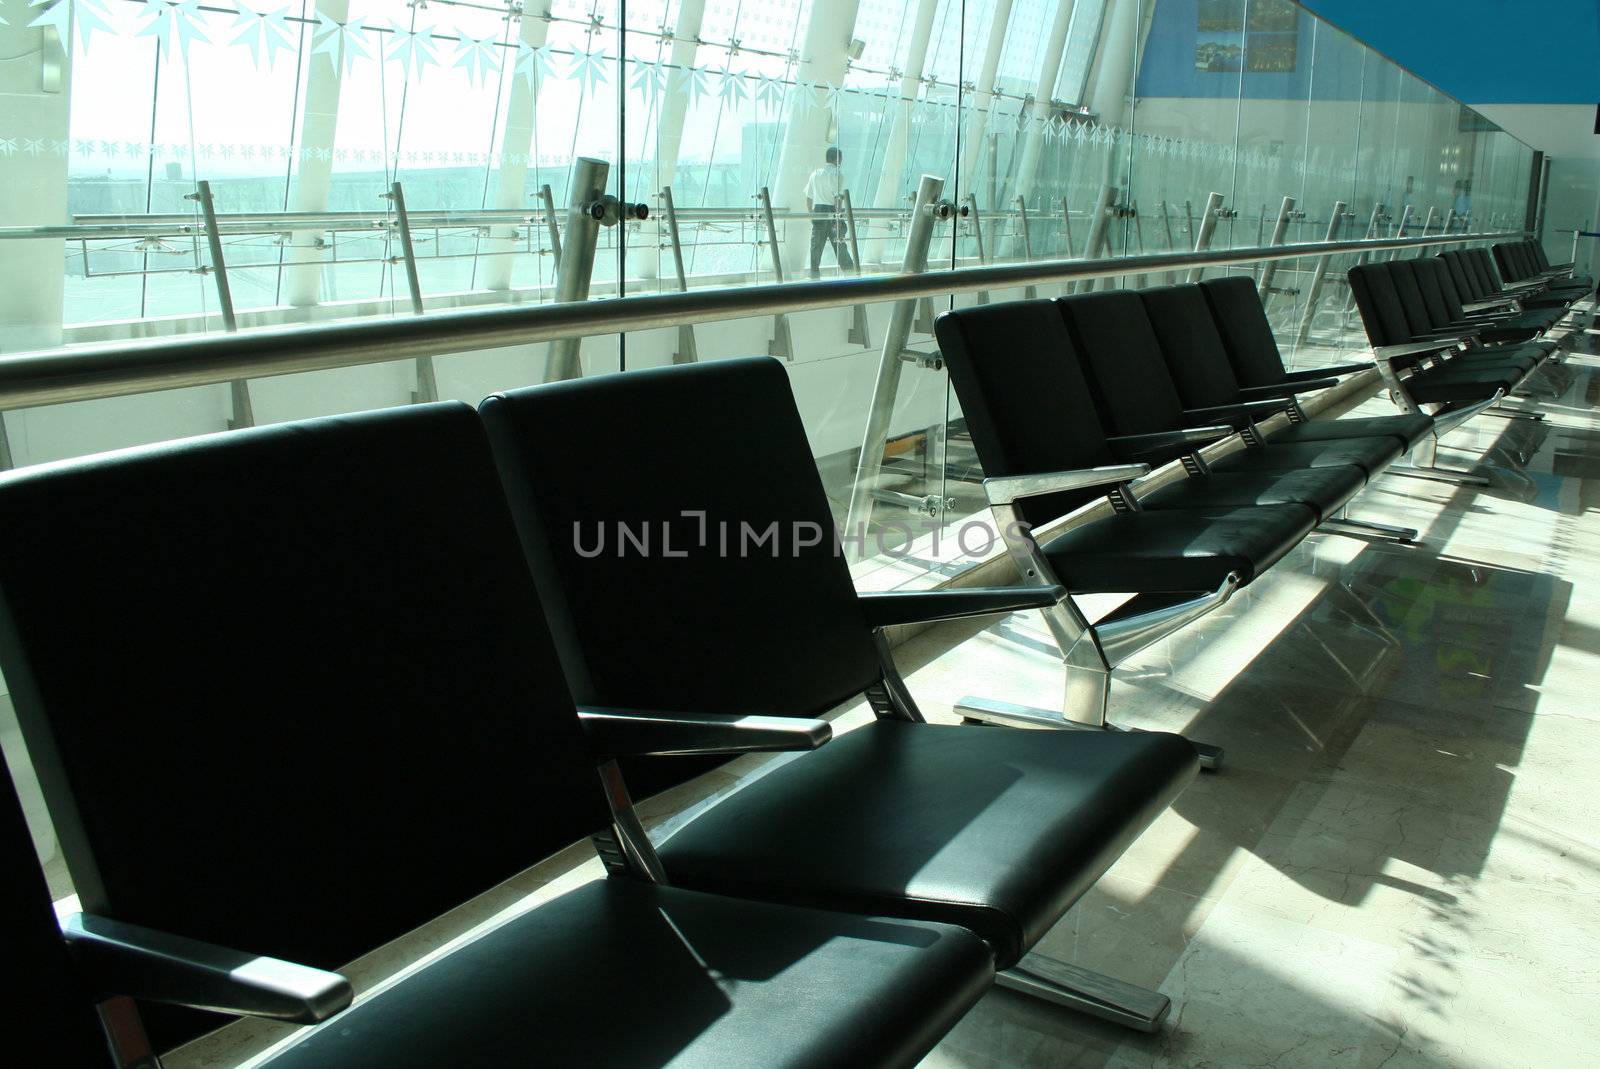 Empty seats at airport with security in background